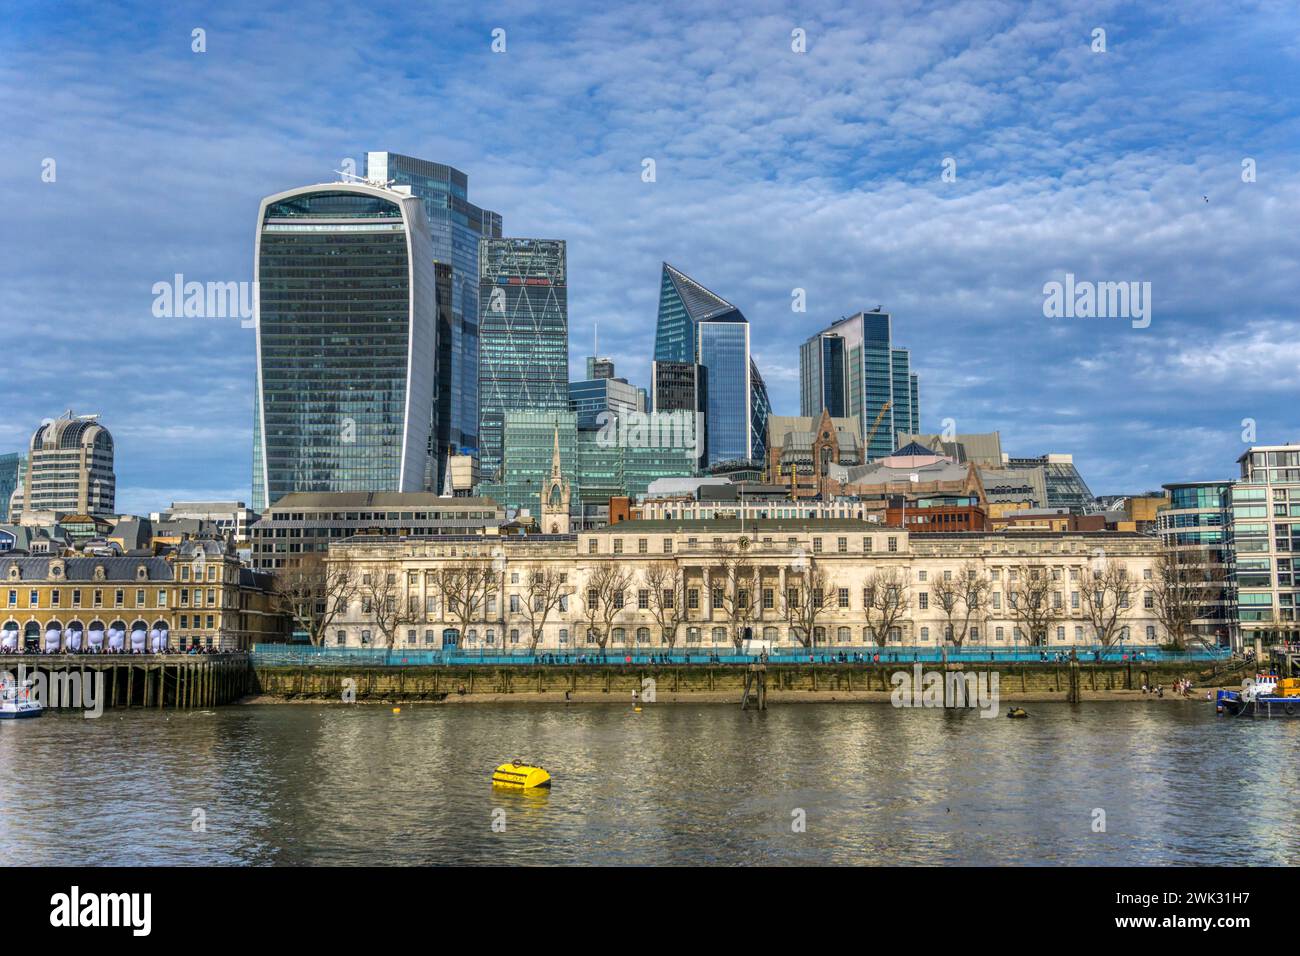 Buildings of the City of London seen across the River Thames, with modern skyscrapers dominating skyline behind the old Billinsgate market building. Stock Photo